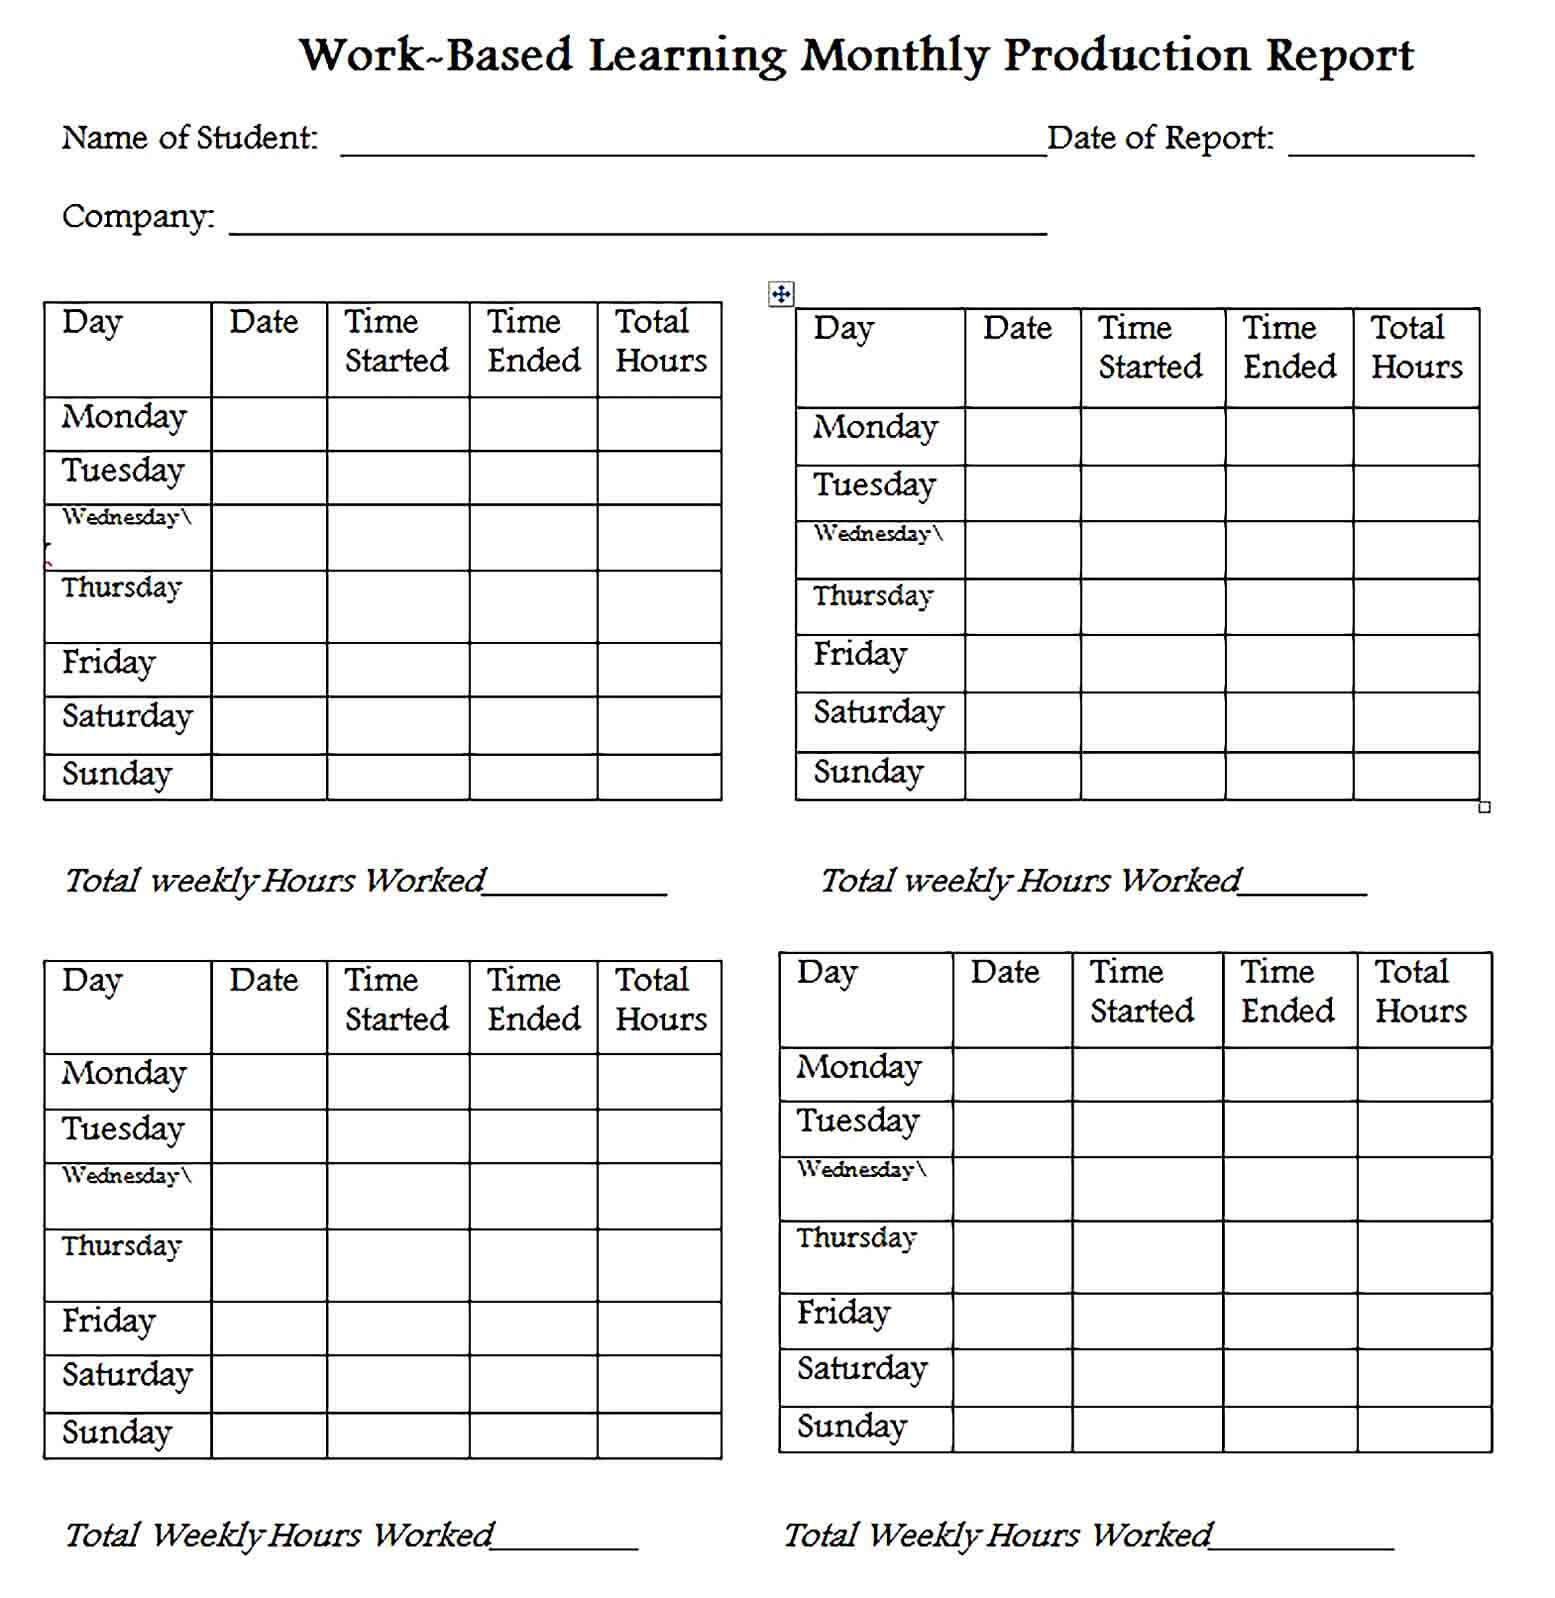 Sample Monthly Production Report Word Template 1